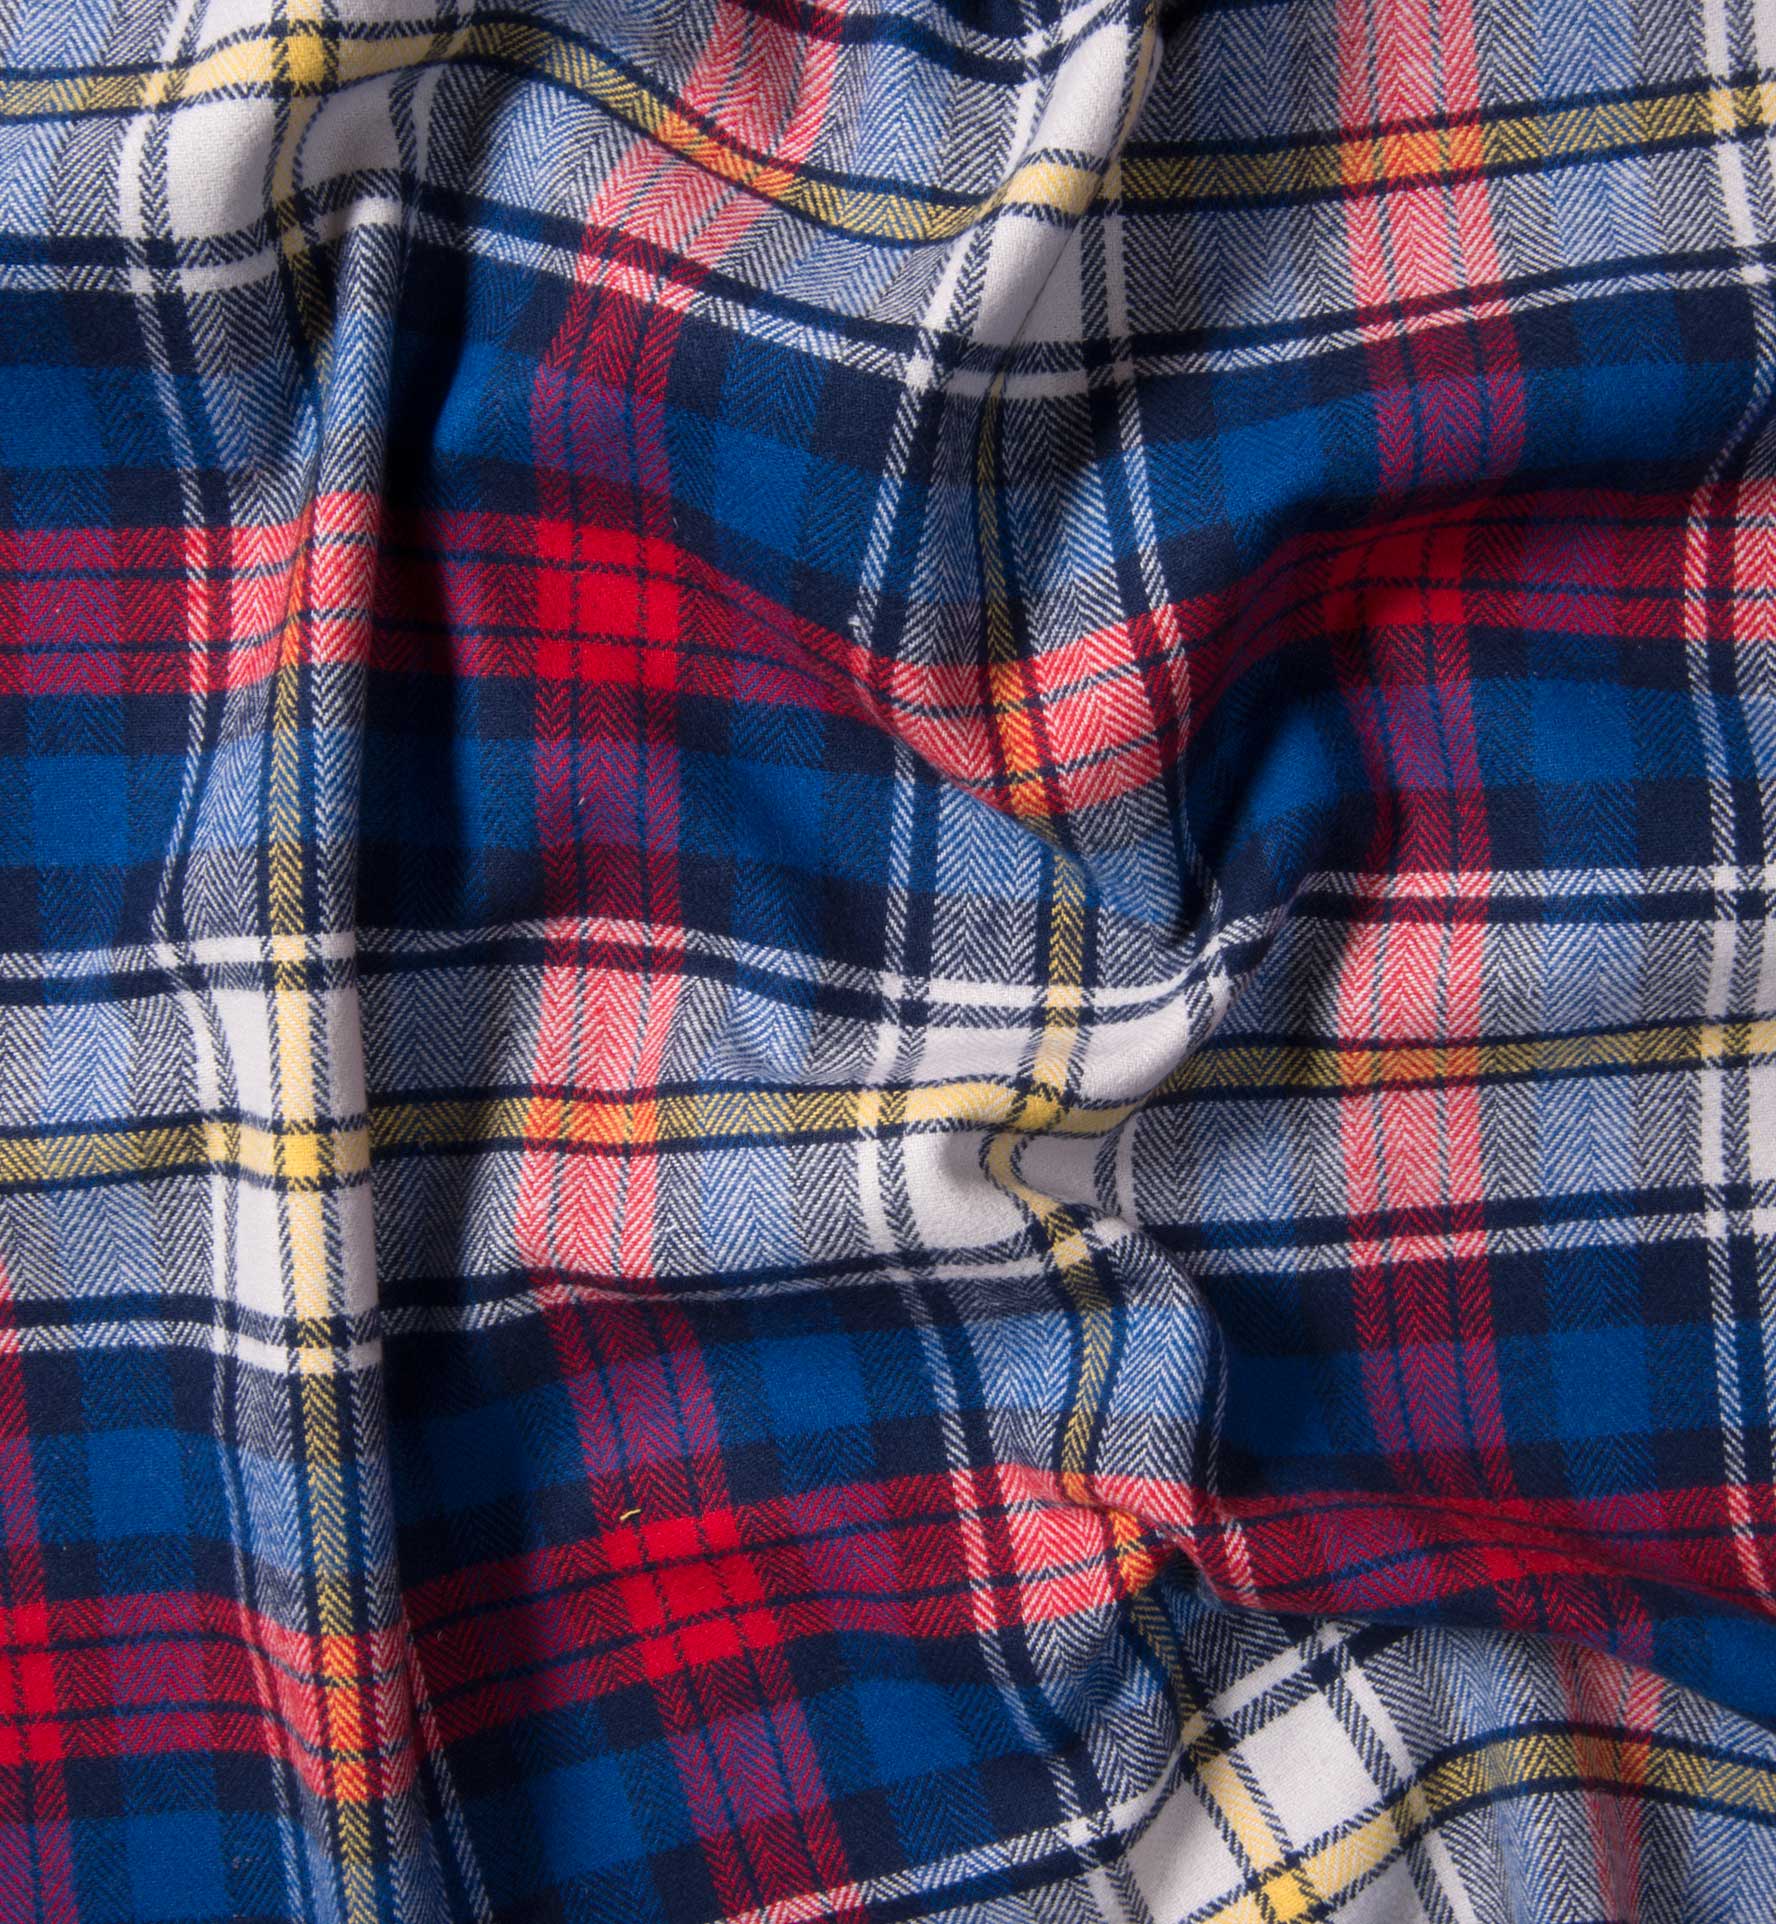 Red and Blue Plaid Country Flannel Shirts by Proper Cloth